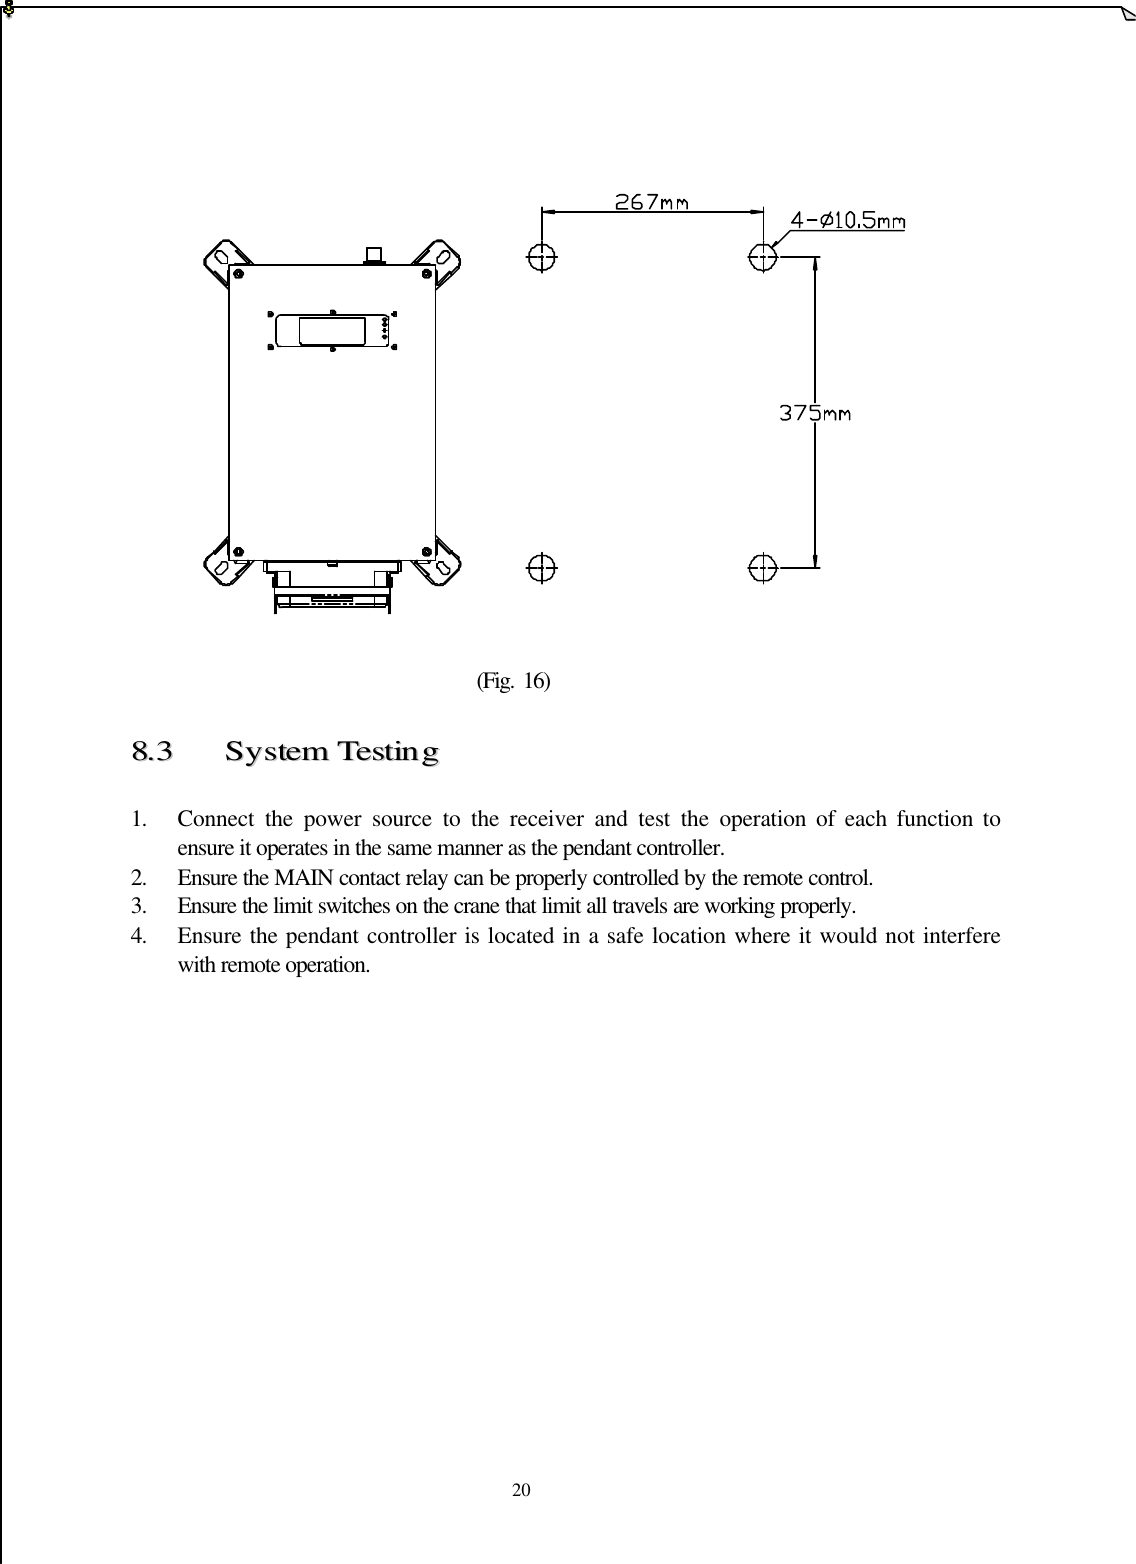   20                            (Fig. 16)  88..33  SSyysstteemm  TTeessttiinngg   1. Connect the power source to the receiver and test the operation of each function to ensure it operates in the same manner as the pendant controller. 2. Ensure the MAIN contact relay can be properly controlled by the remote control. 3. Ensure the limit switches on the crane that limit all travels are working properly.  4. Ensure the pendant controller is located in a safe location where it would not interfere with remote operation.               